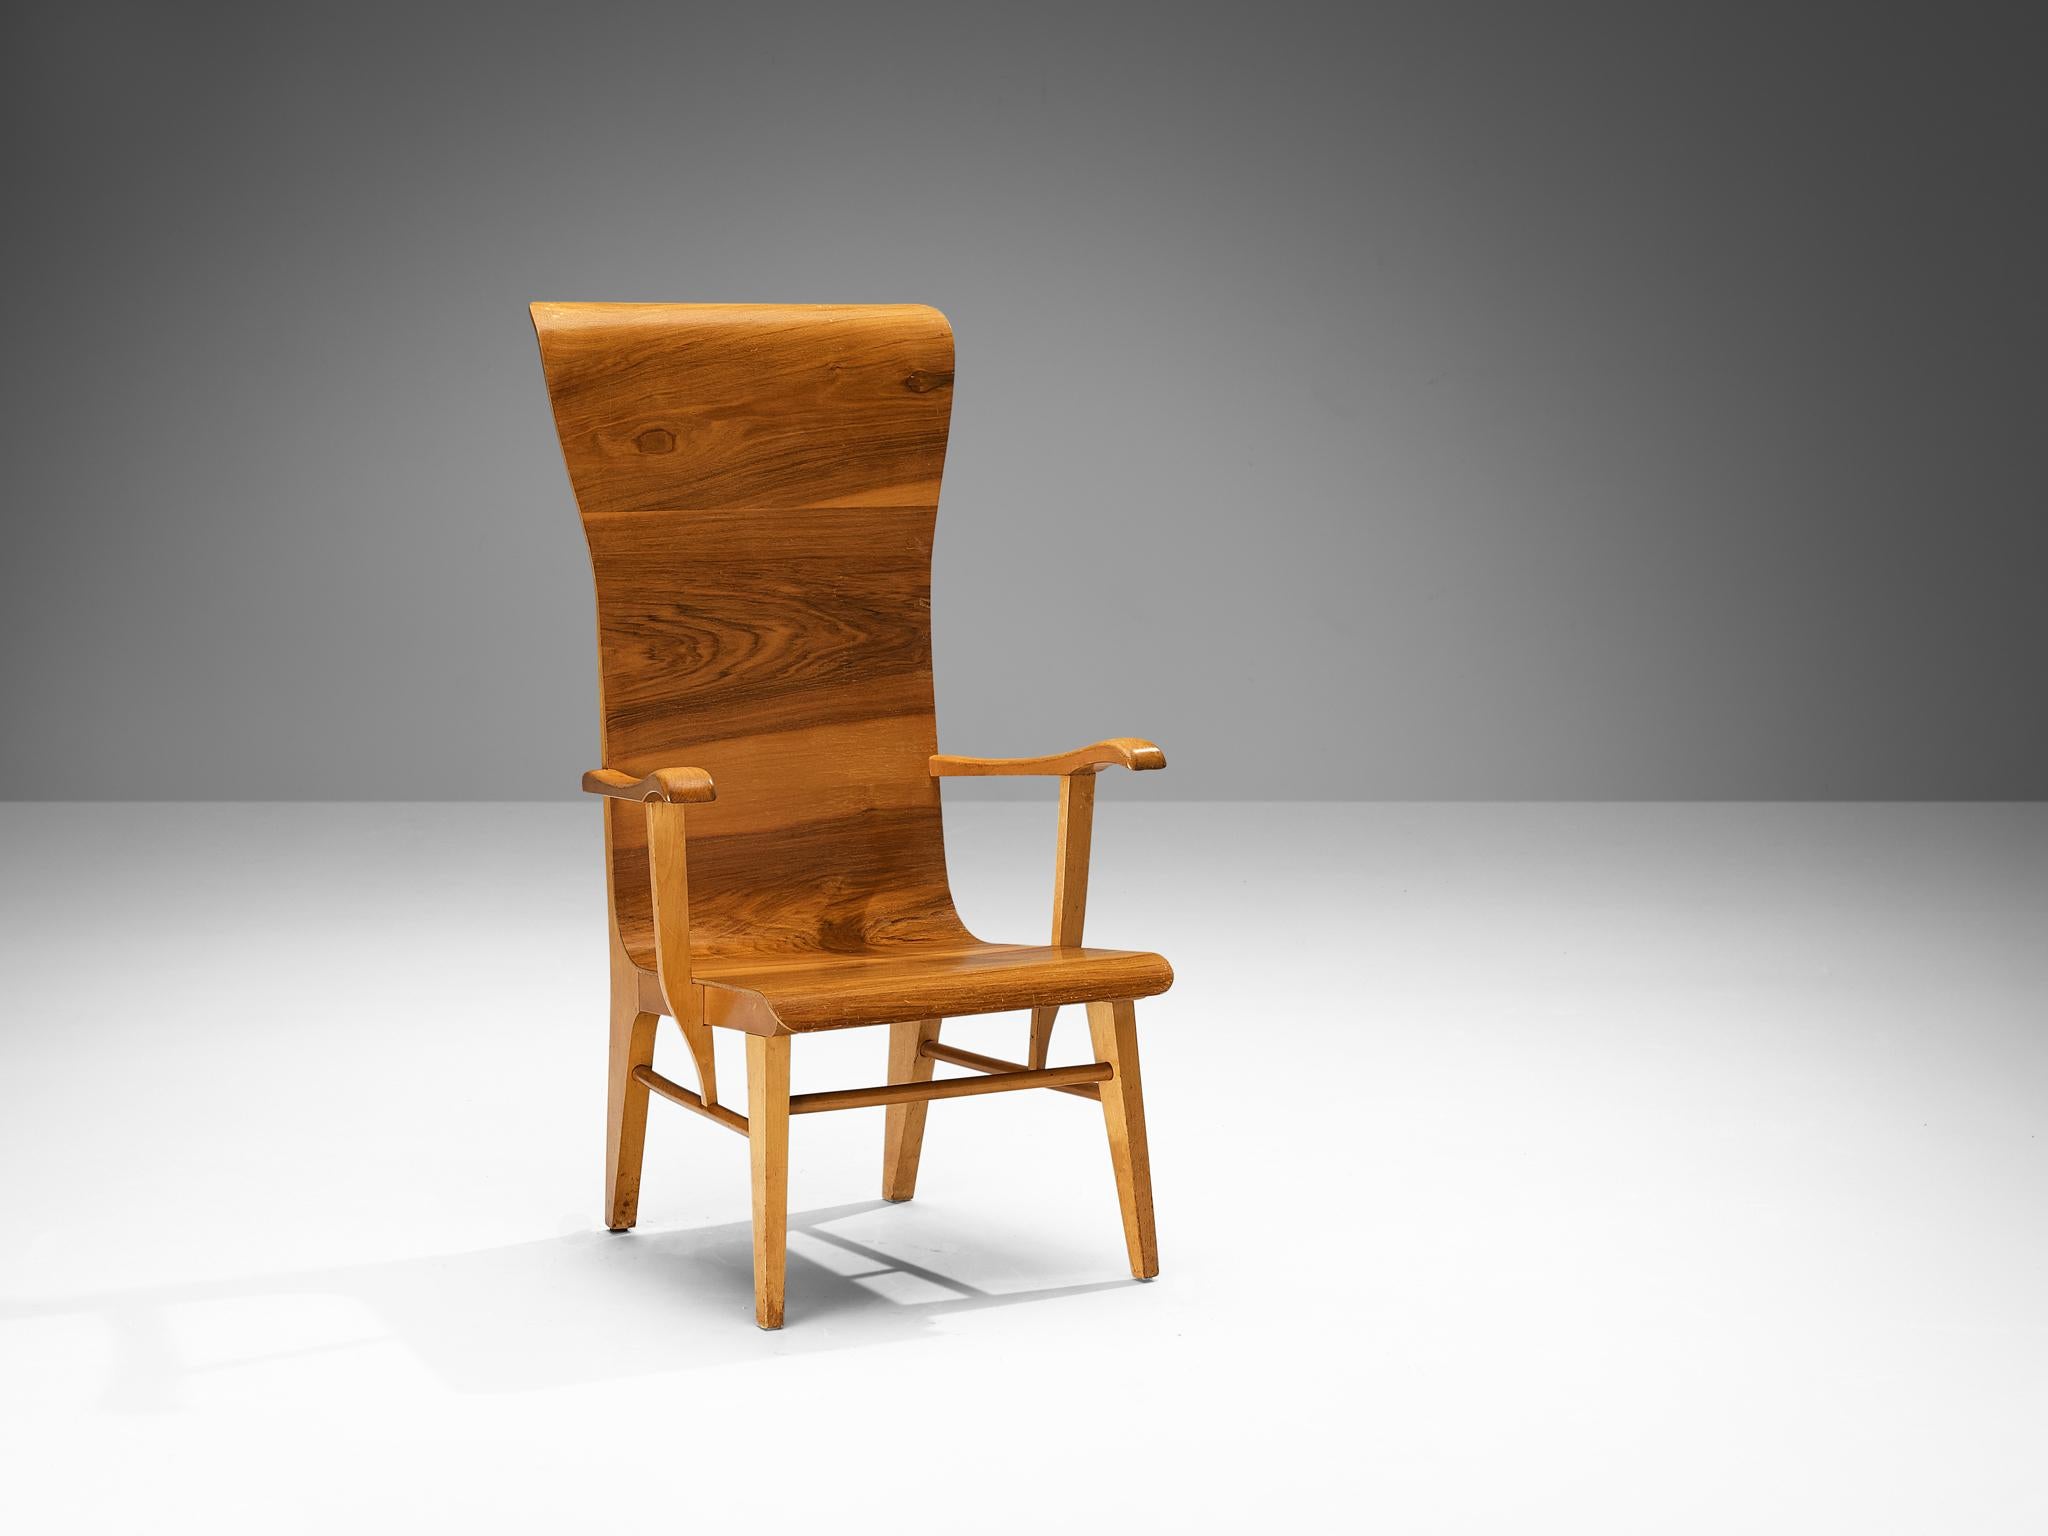 Auke Komter for Metz & Co, chair, beech, plywood, walnut, The Netherlands, 1930s

This stately chair was designed by Dutch Architect Auke Komter in the early 1930s. The armchair is made from a solid beech frame with bend plywood shell that flows